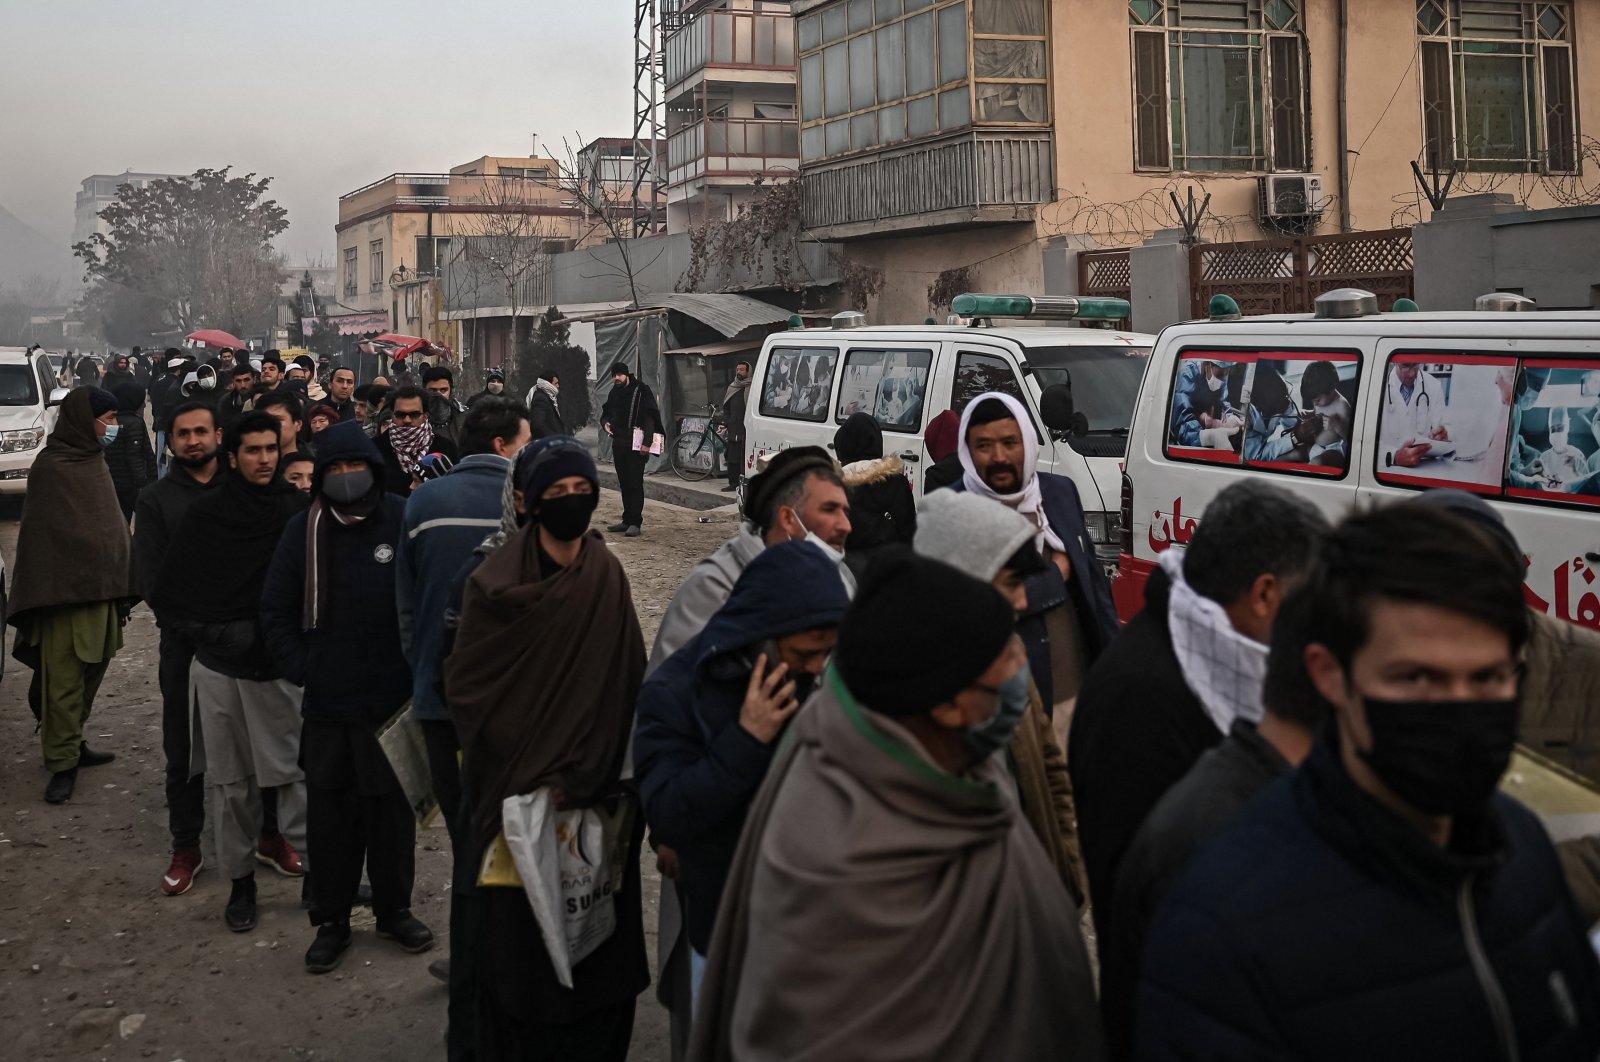 People queue to enter the passport office at a checkpoint in Kabul on Dec. 19, 2021, after Afghanistan&#039;s Taliban authorities said they will resume issuing passports. (AFP Photo)